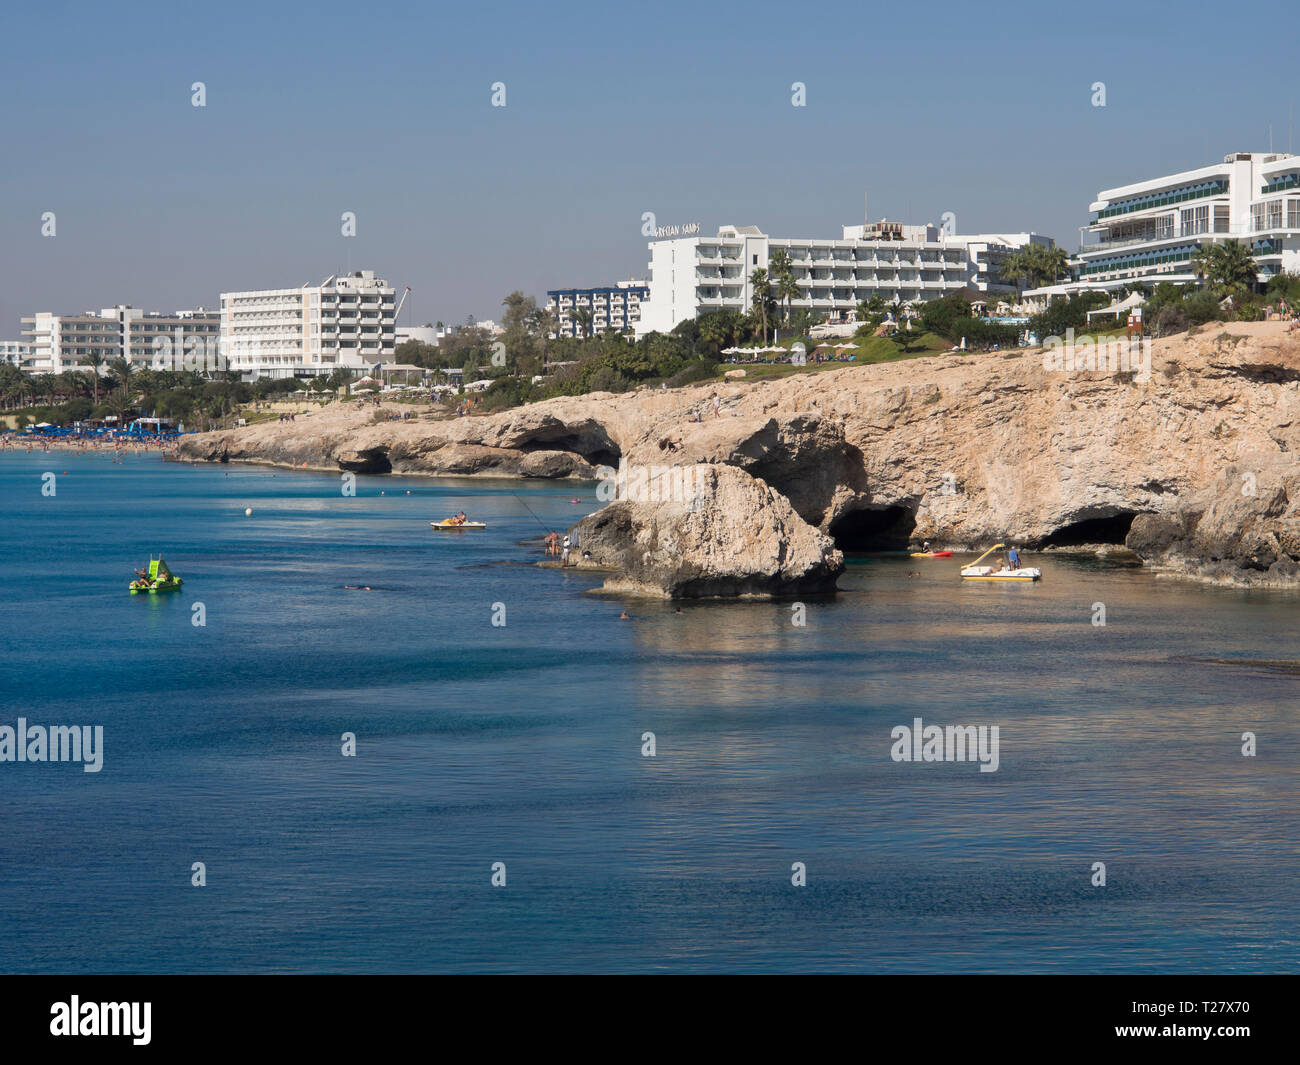 Sun and sea, cliffs and beach, tourists and hotels the essence of a successful holiday in Ayia Napa Cyprus Stock Photo